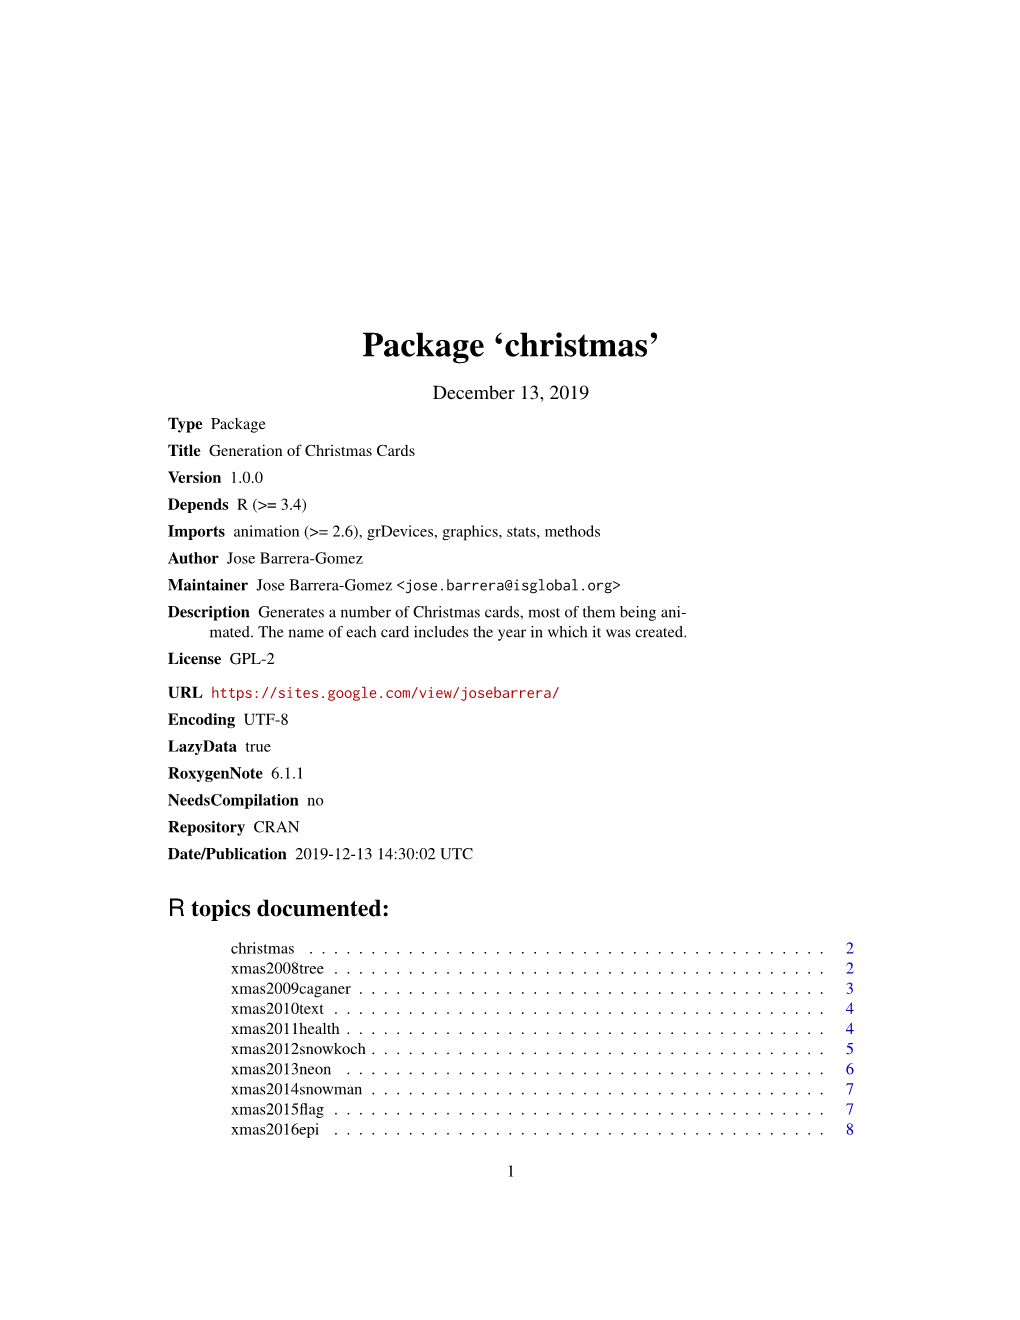 Package 'Christmas'